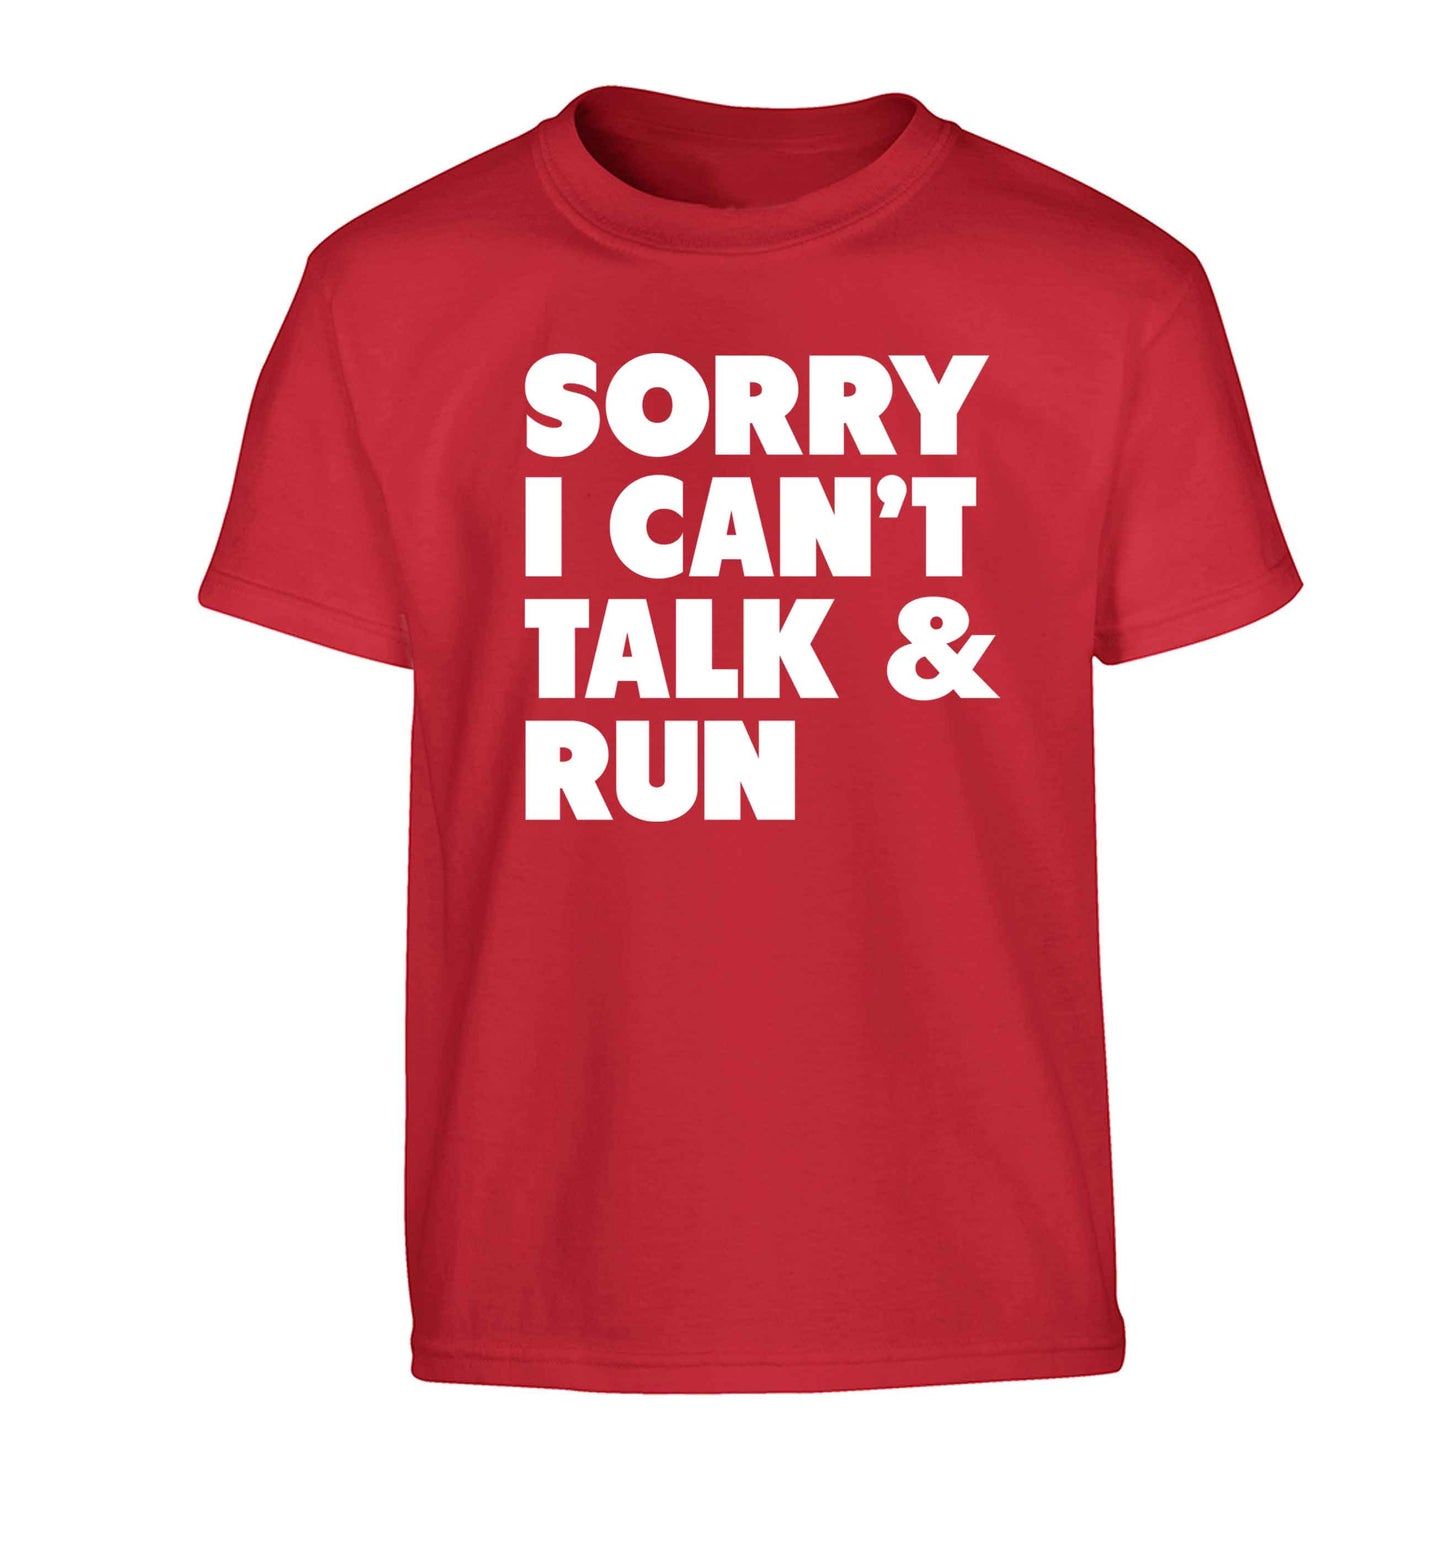 Sorry I can't talk and run Children's red Tshirt 12-13 Years